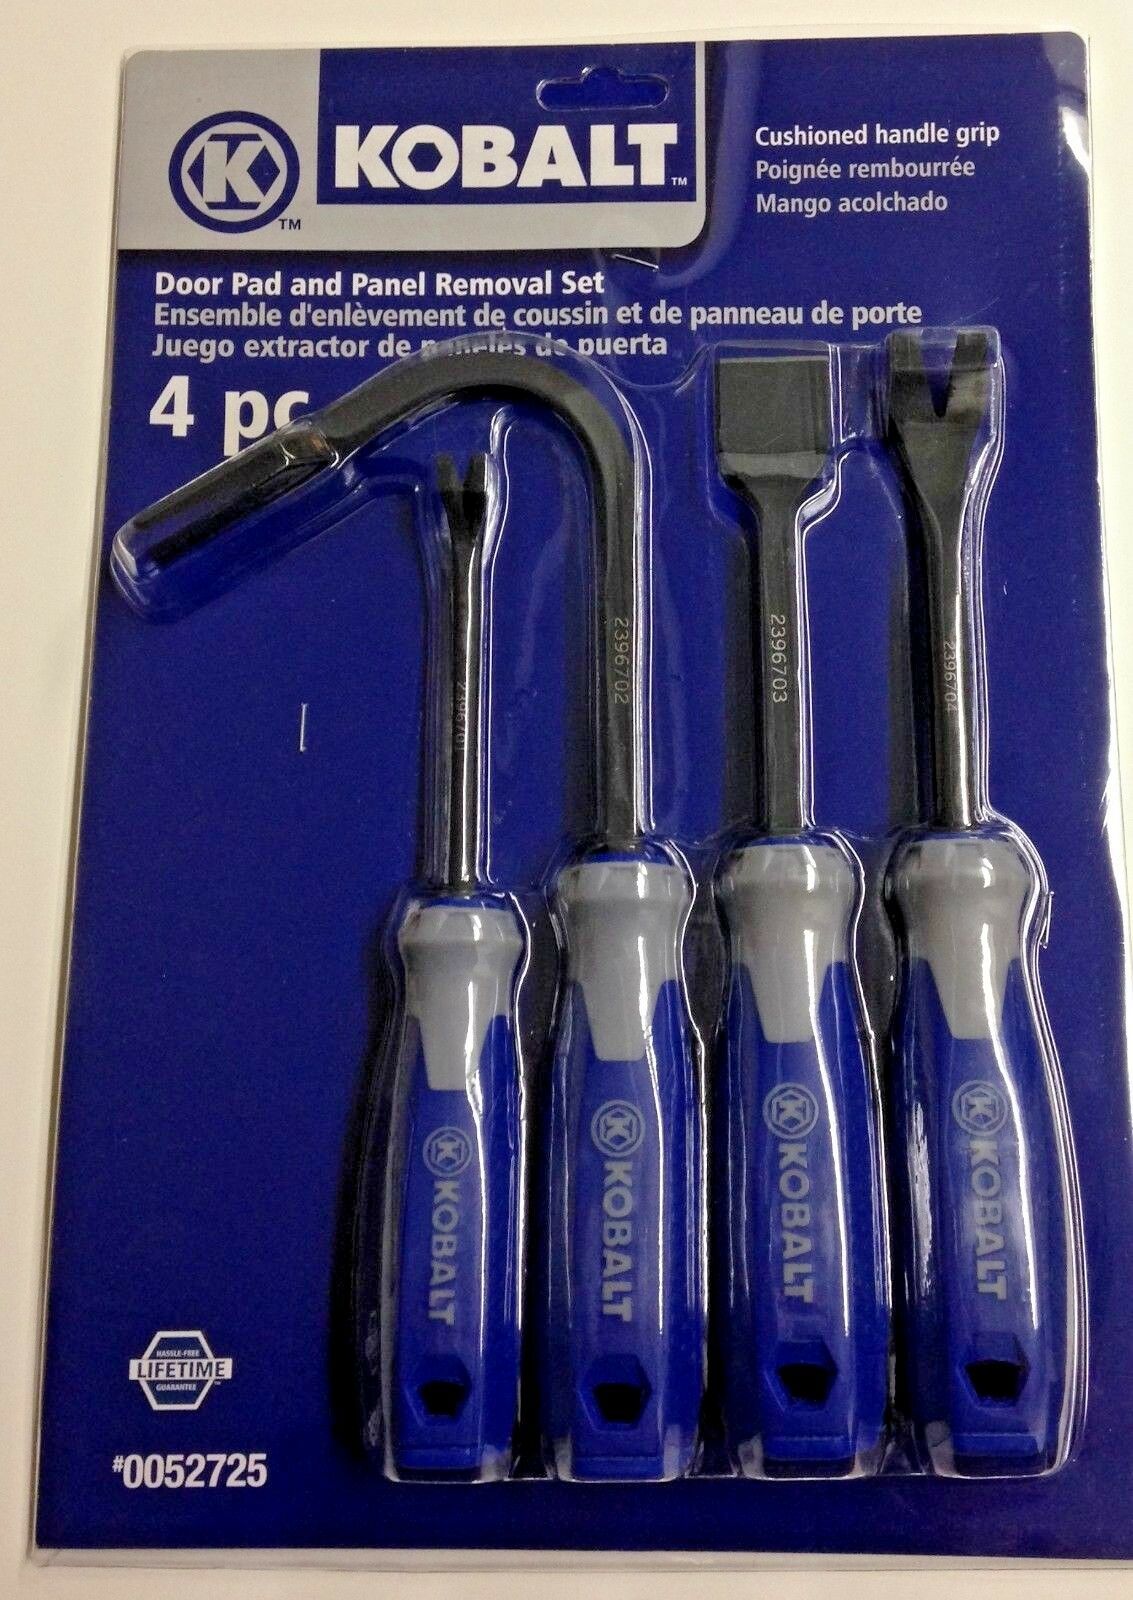 Kobalt 23967 4 Piece Door Pad And Panel Removal Set (Cushioned Handle Grips)